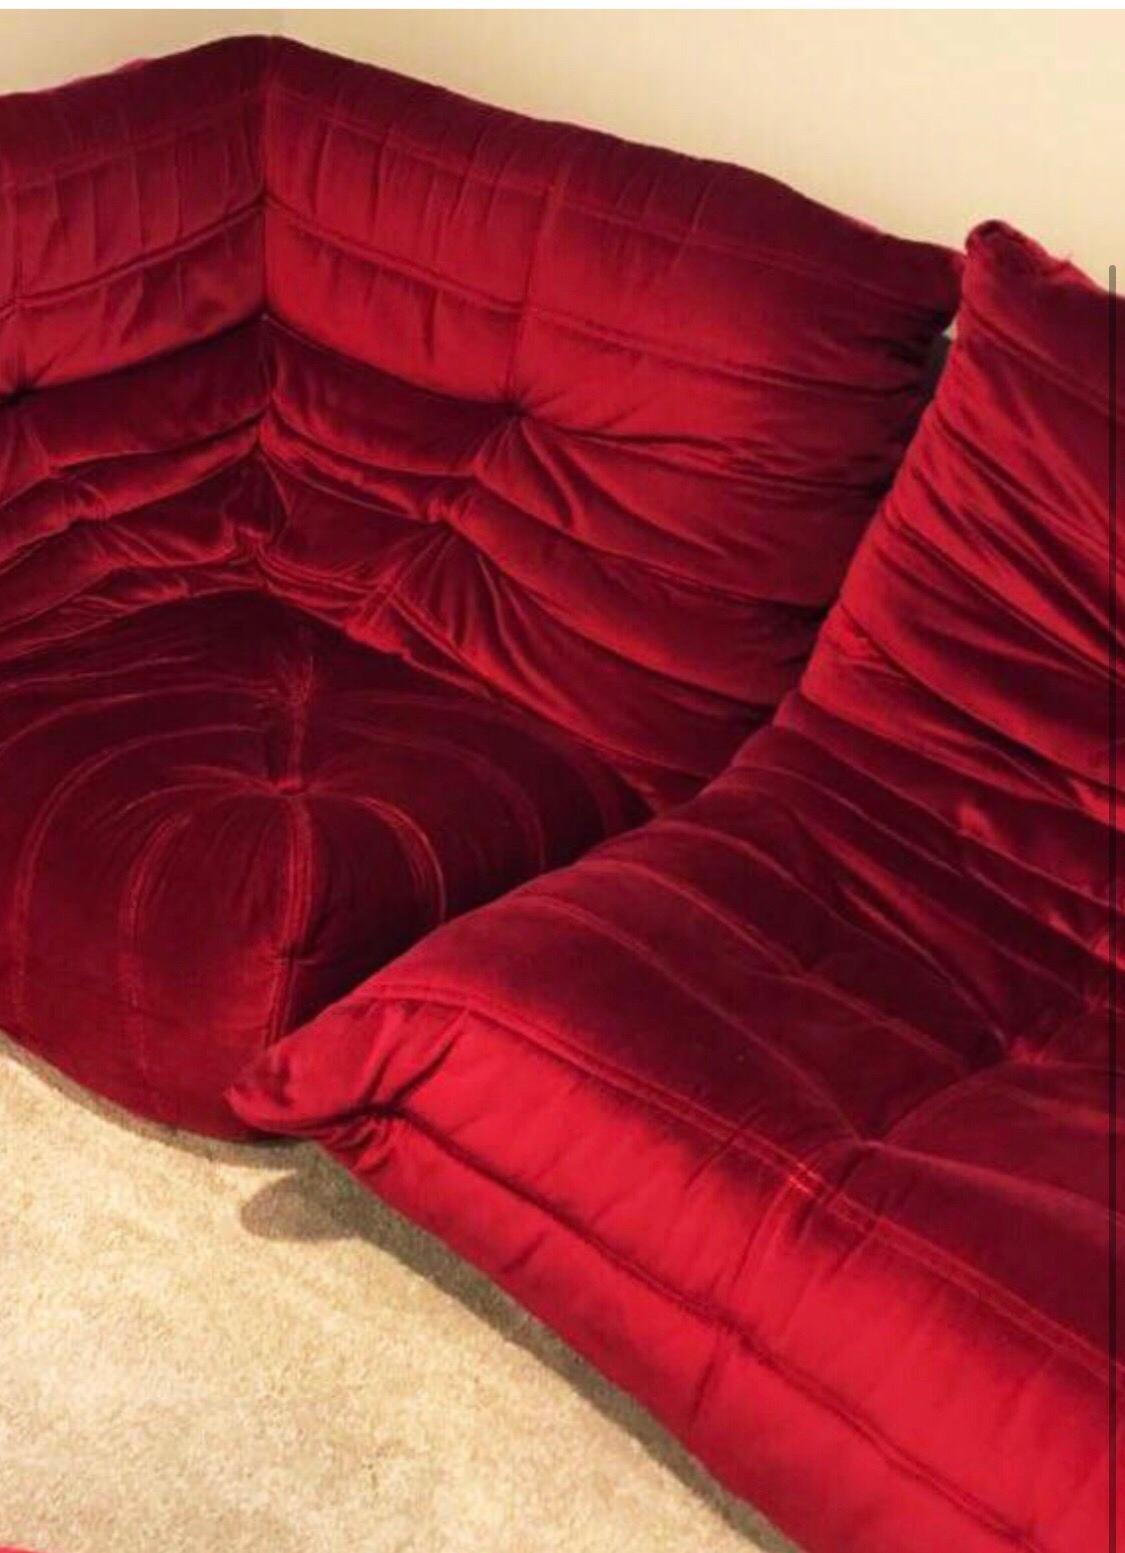 Please find and follow our 1stdibs storefront at 1stdibs dot com backslash dealers backslash Otto-Binx
Stunning Red (Silk) Velvet Togo Sofa Set of 3 by Michel Ducaroy for Ligne Roset. With tags. Dated July 20, 1978

Corner piece: 14 SH x 28 H x 40 x